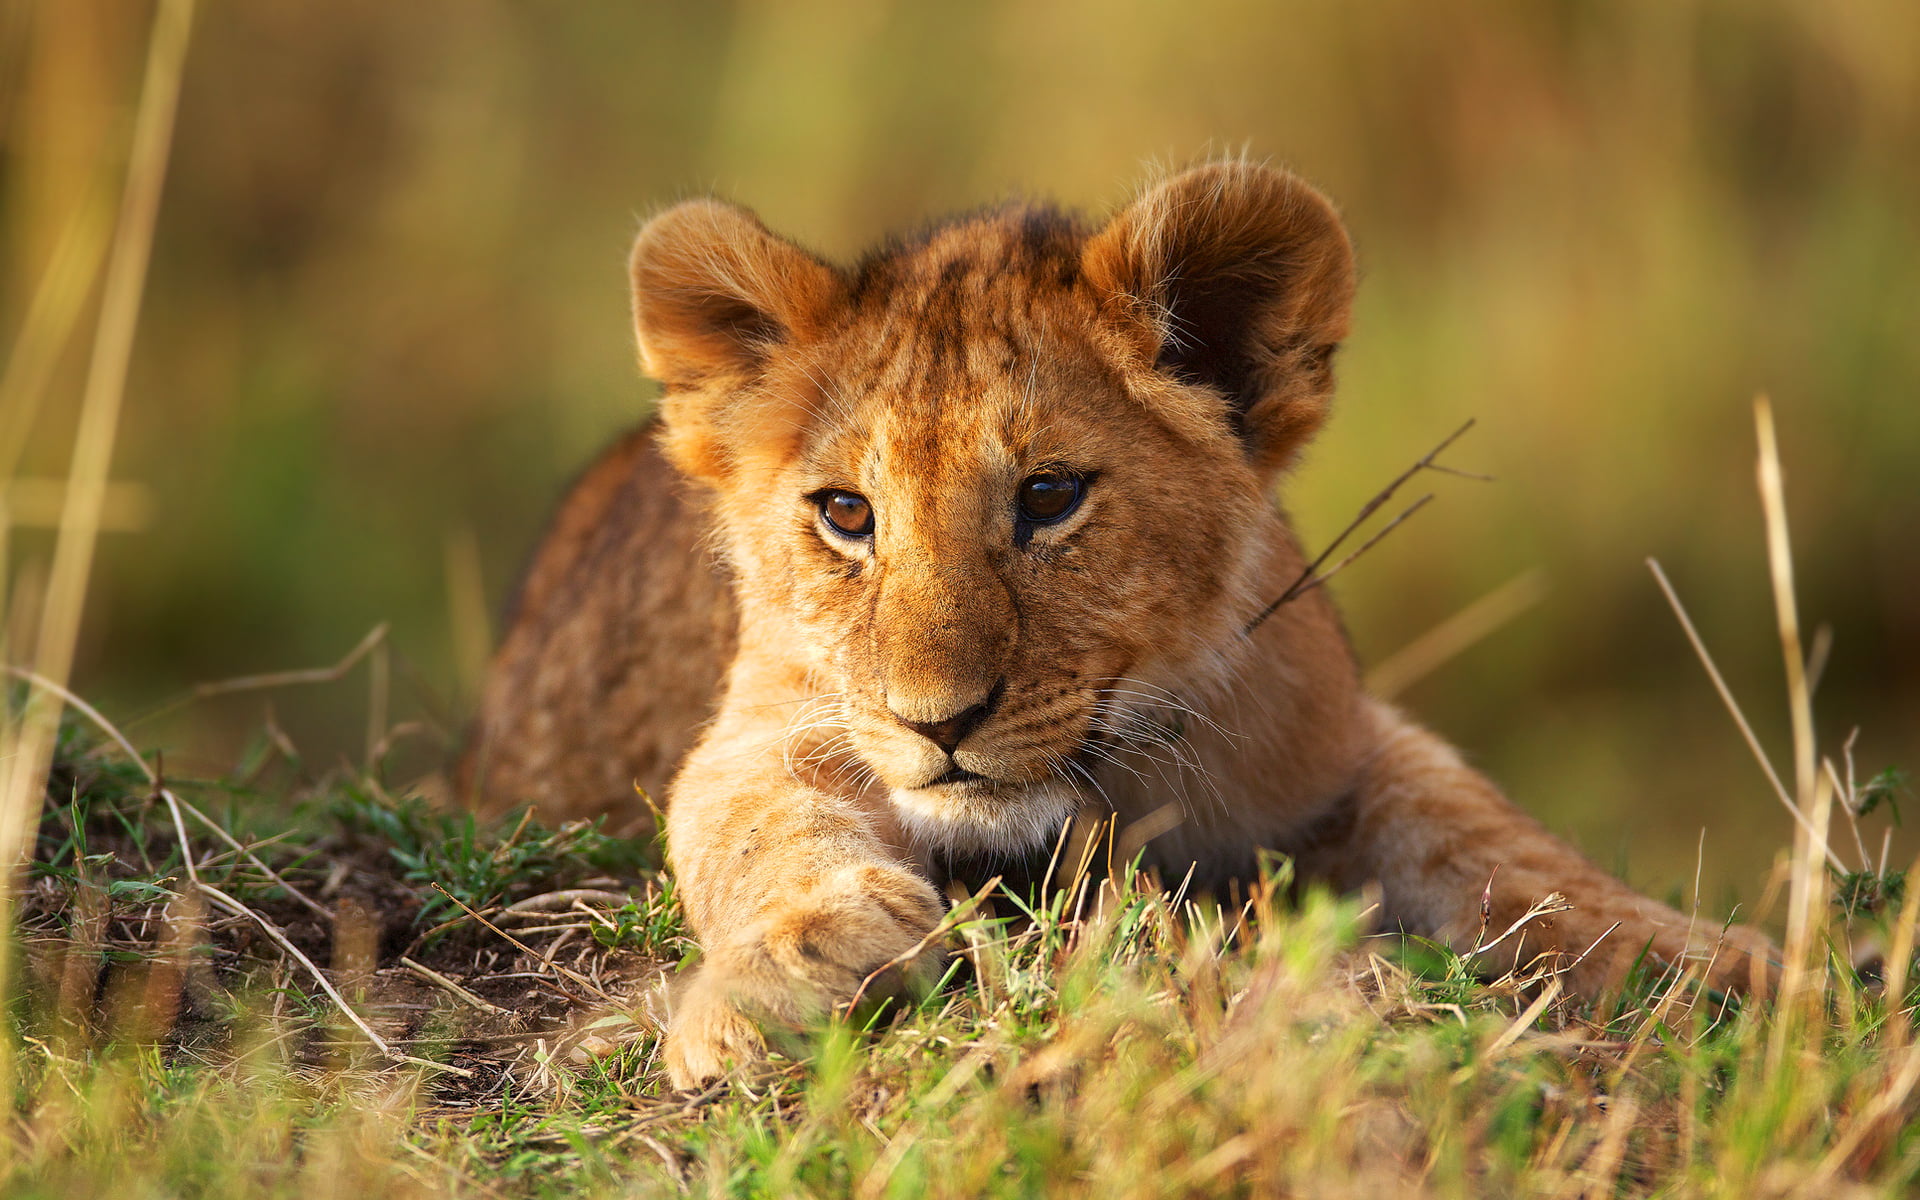 Lion cab lying on grass field during daytime HD wallpaper ...